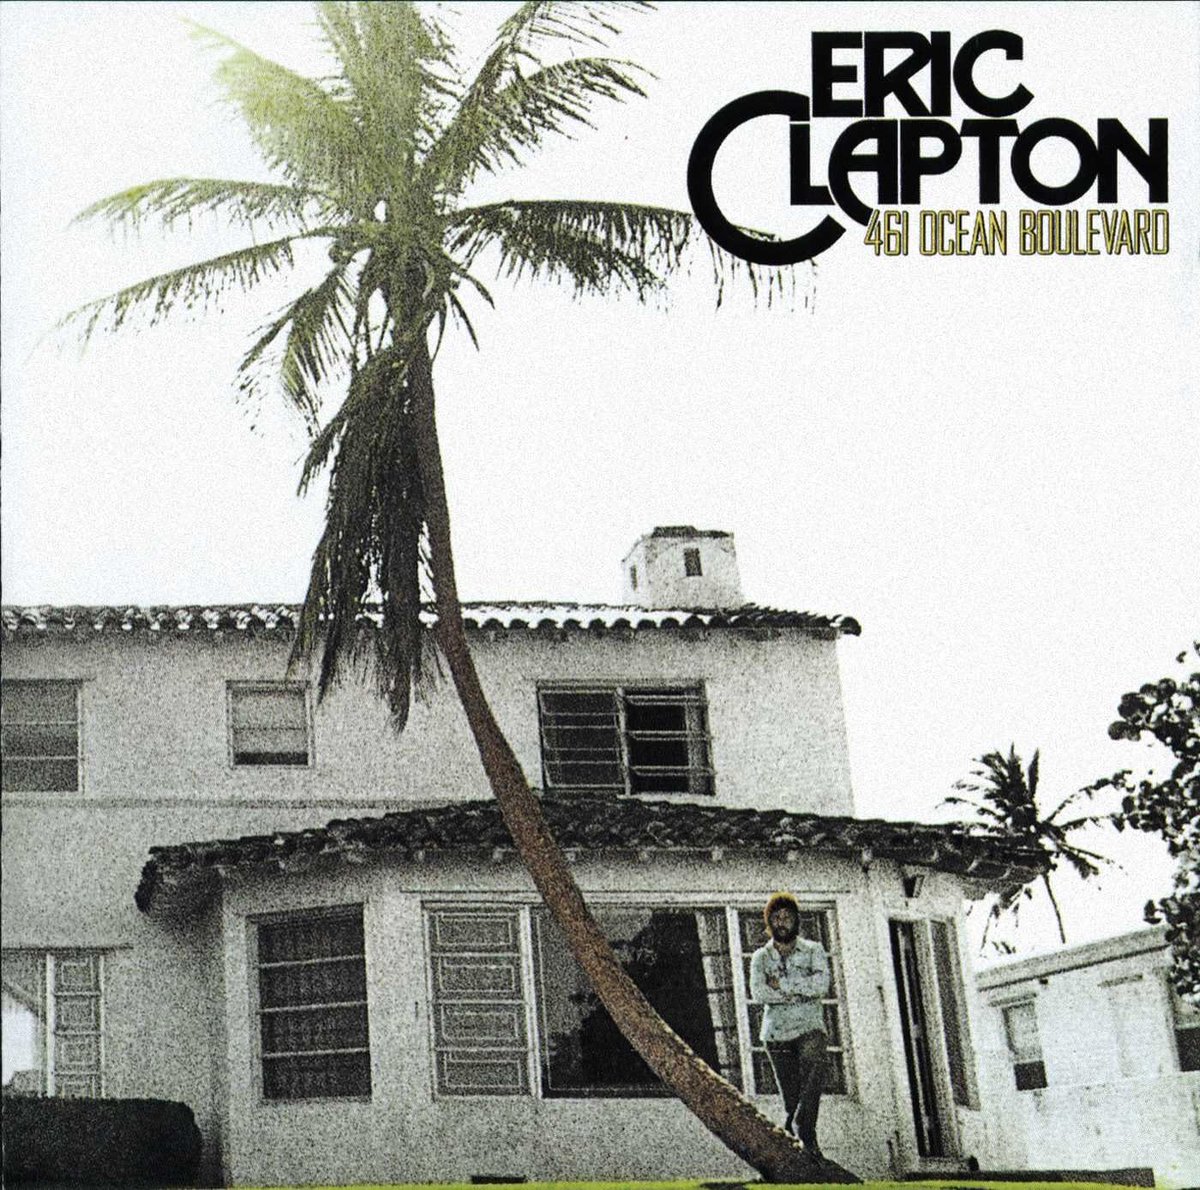 Eric Clapton - 461 Ocean Boulevard, 1974 Is the second solo album by Eric Clapton. It was released after the RSO Records released the hit single 'I Shot the Sheriff'. The album was Clapton's return to the recording studio after a three-year hiatus.